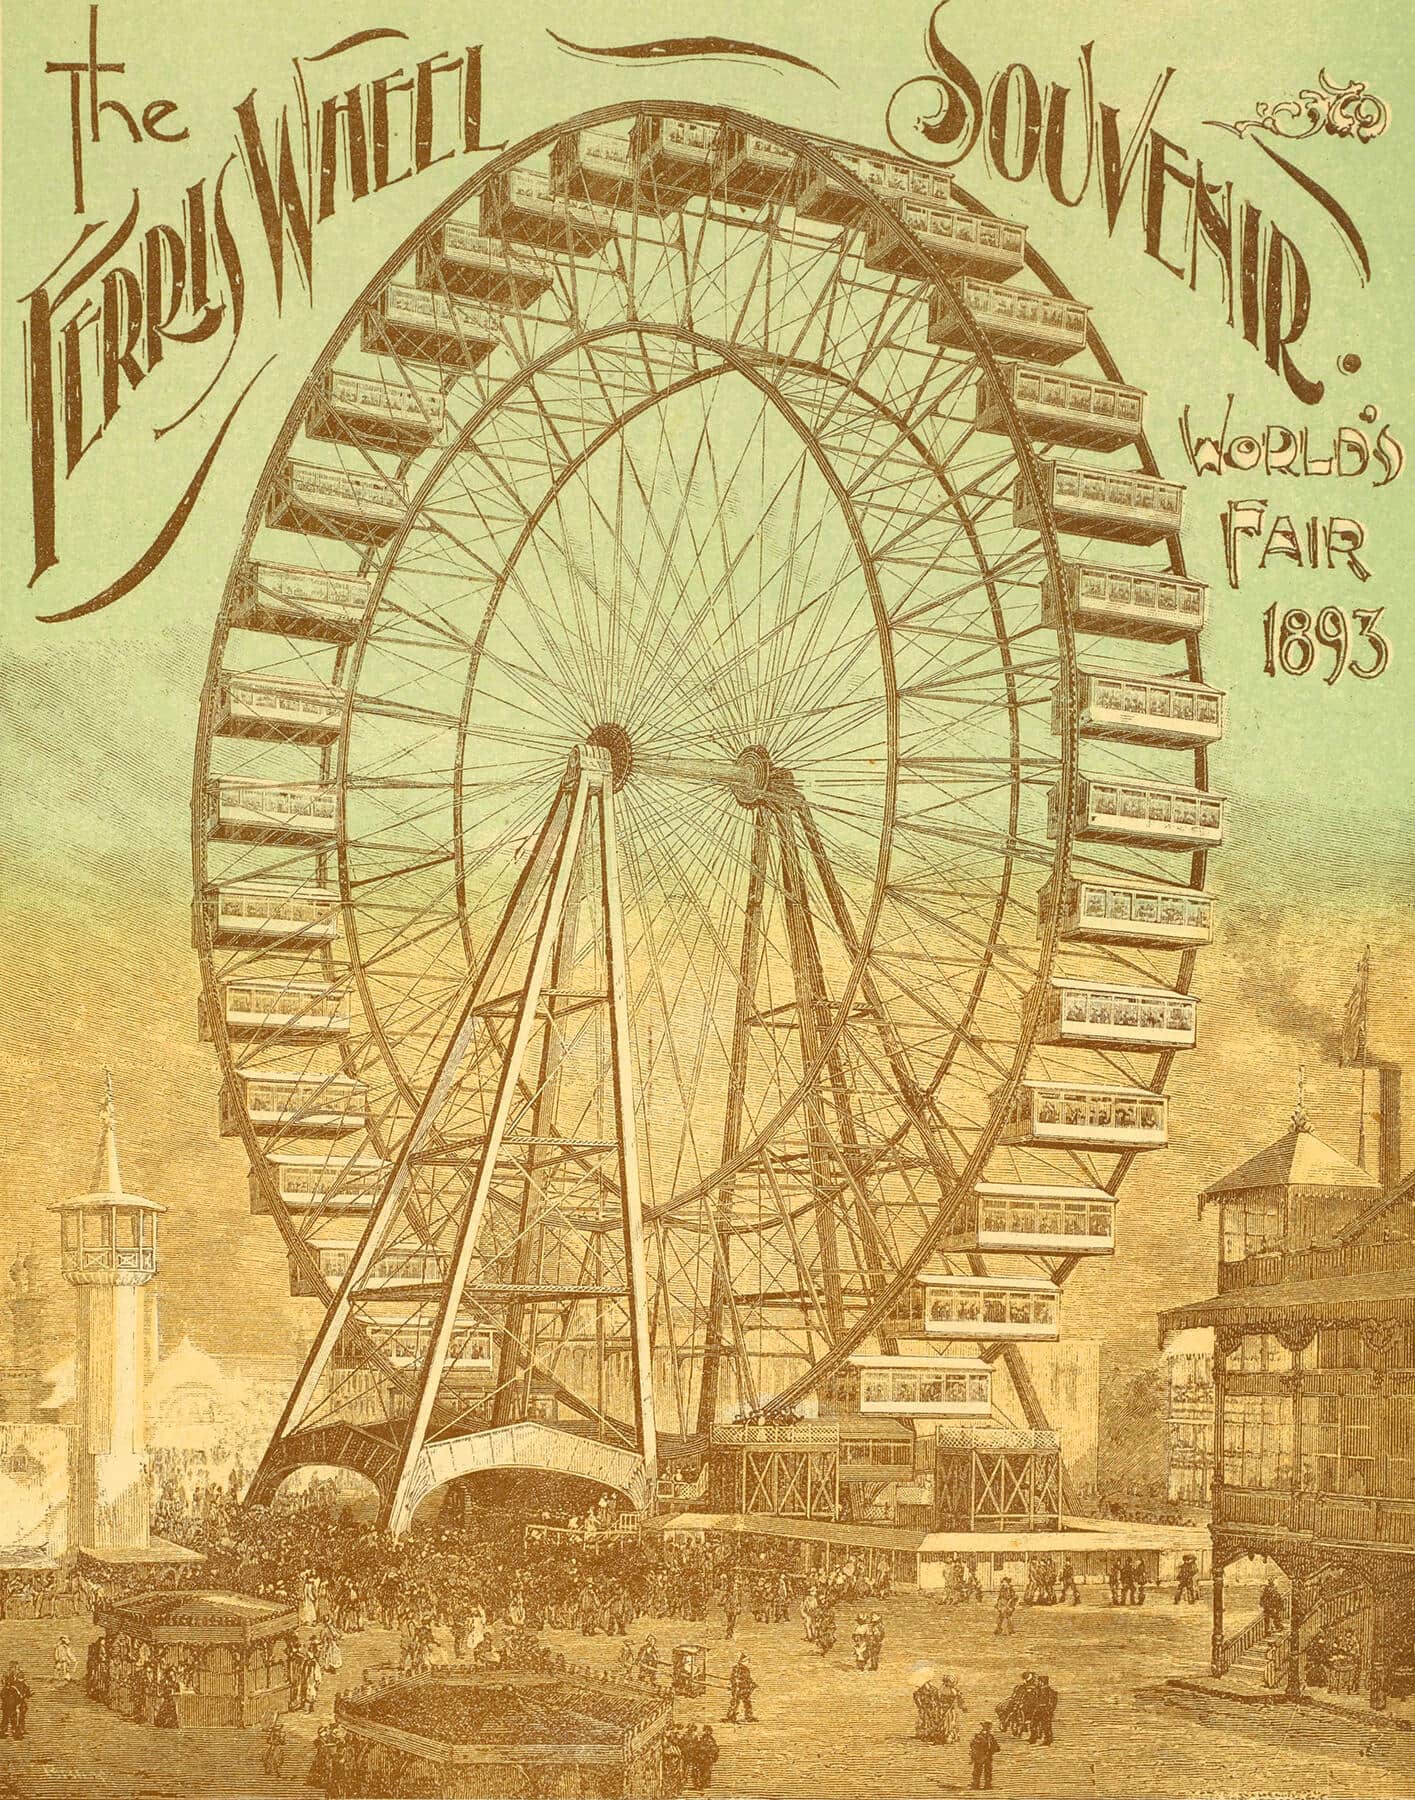 Historic illustration of a ferris wheel from the World's Fair 1893.